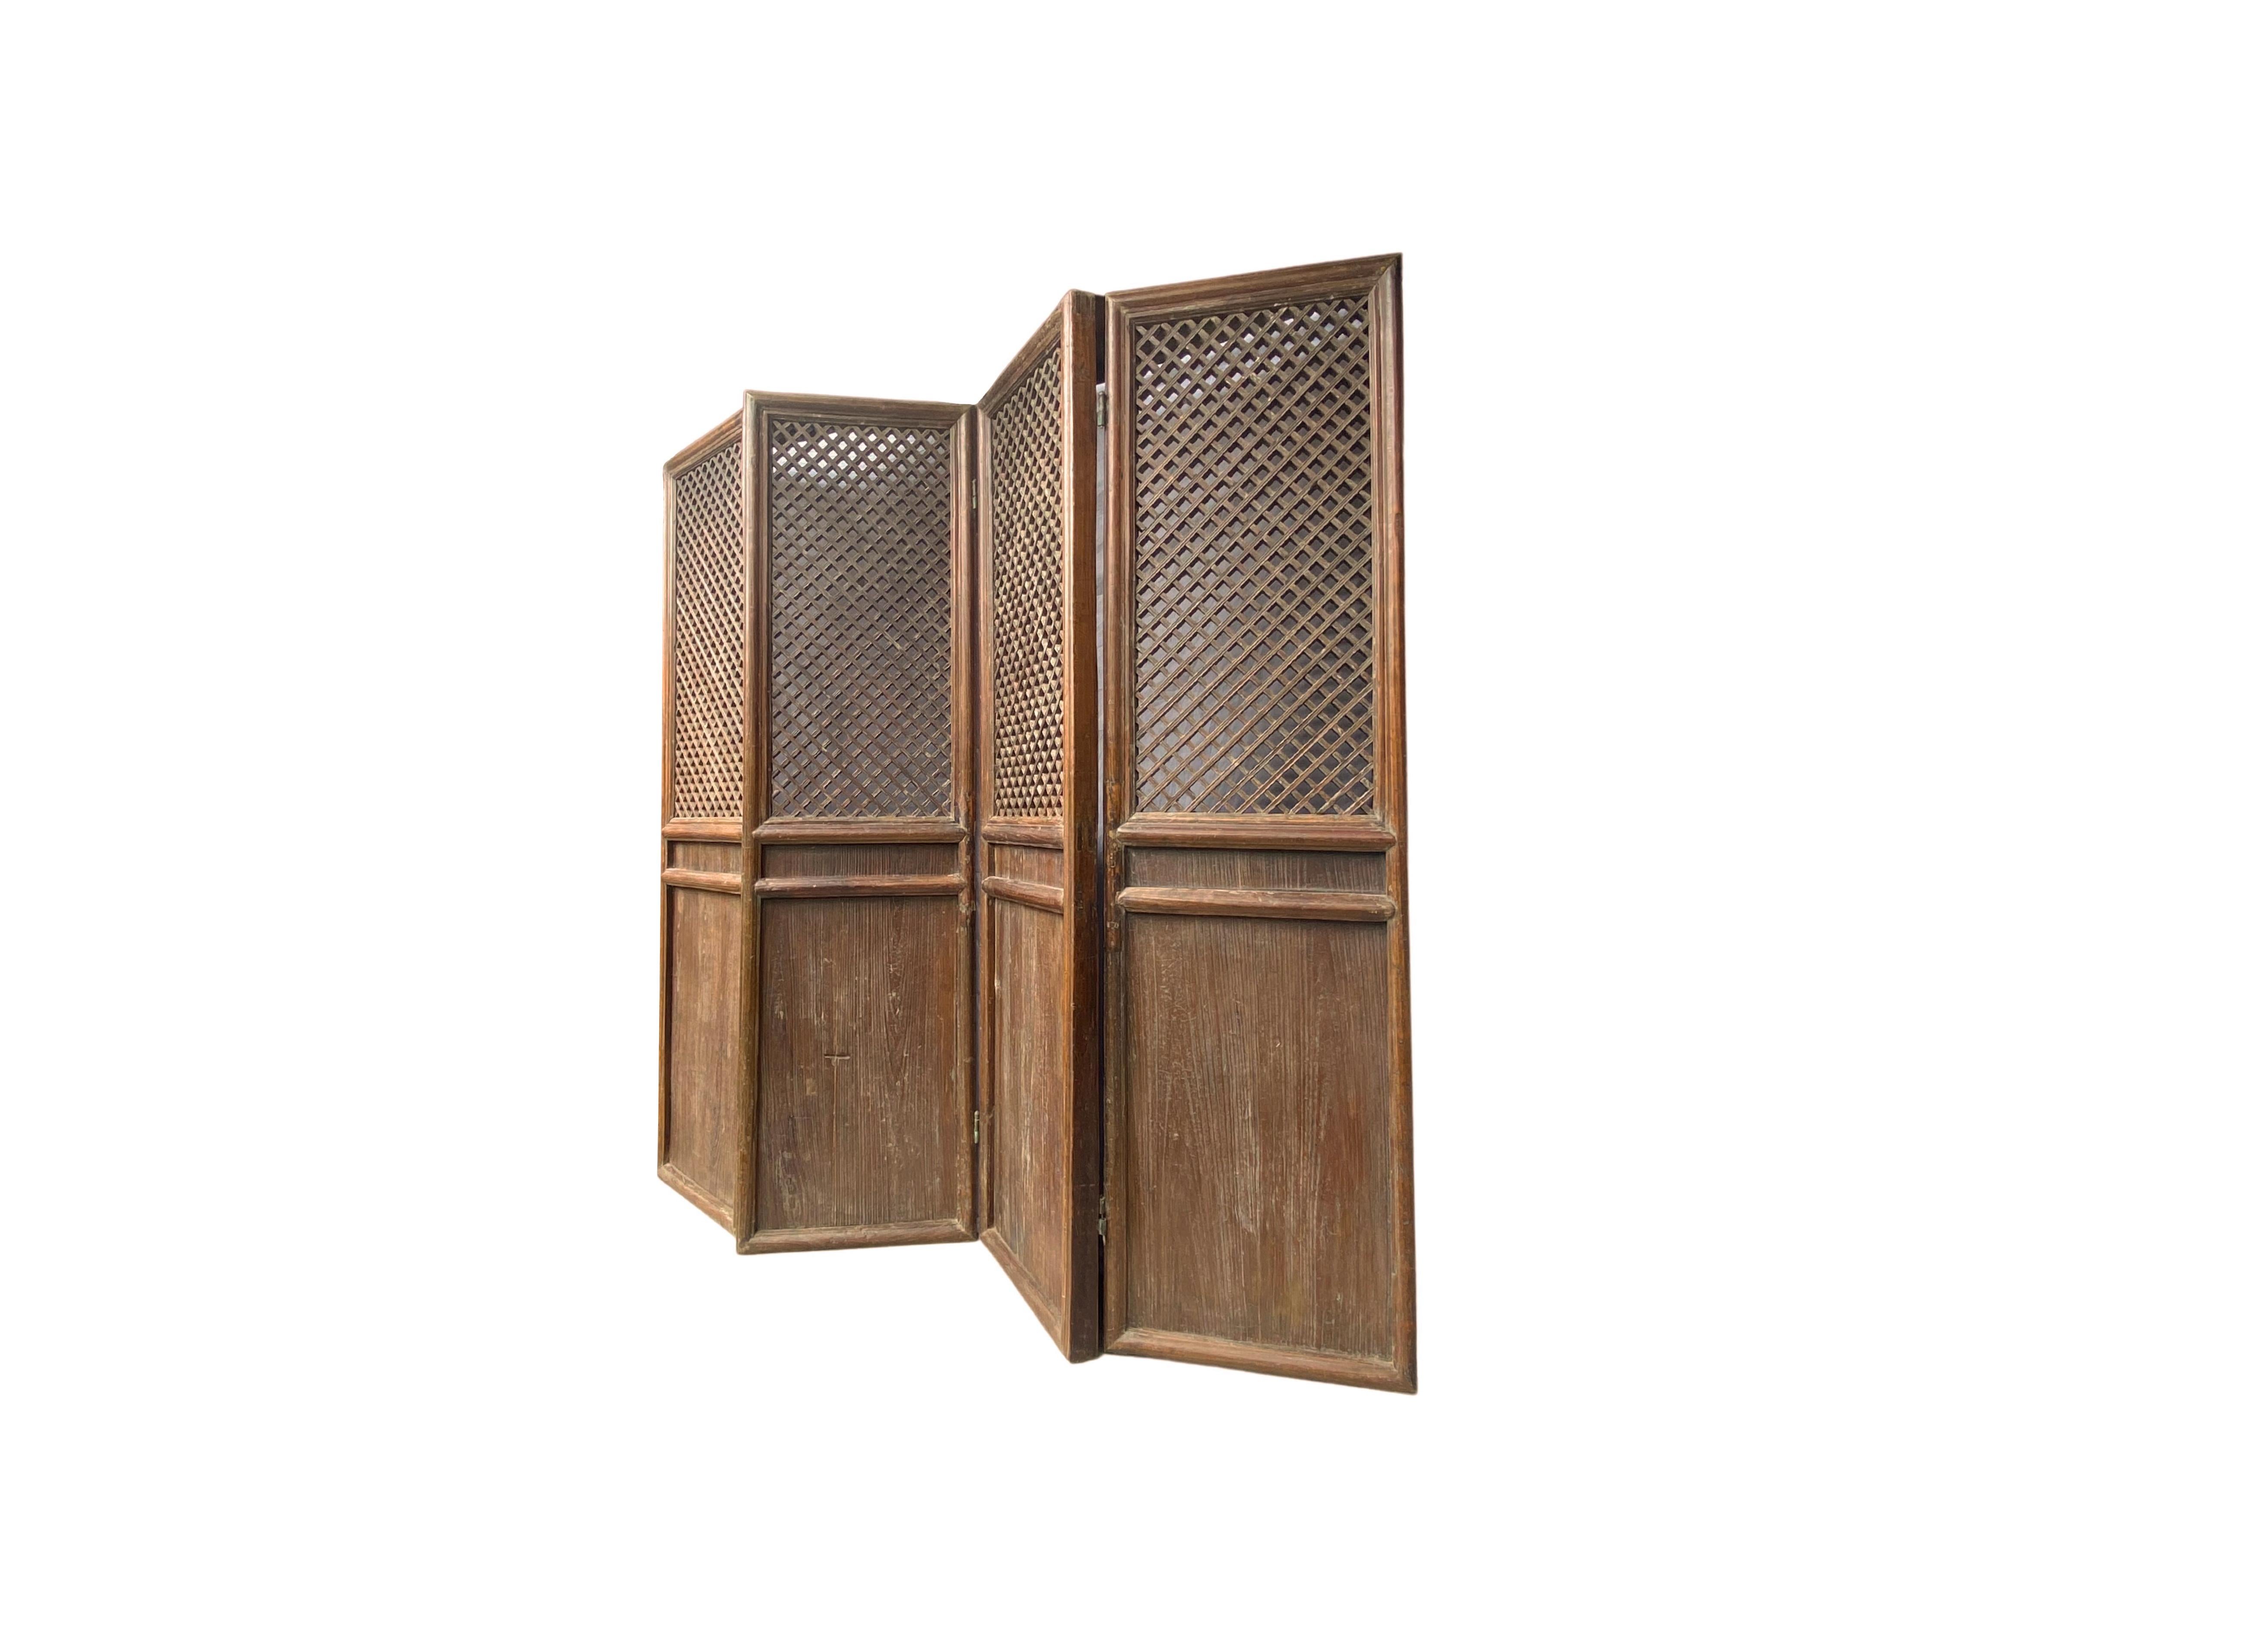 Qing Dynasty Chinese Four Panel Screen c. 1850 In Good Condition For Sale In Jimbaran, Bali